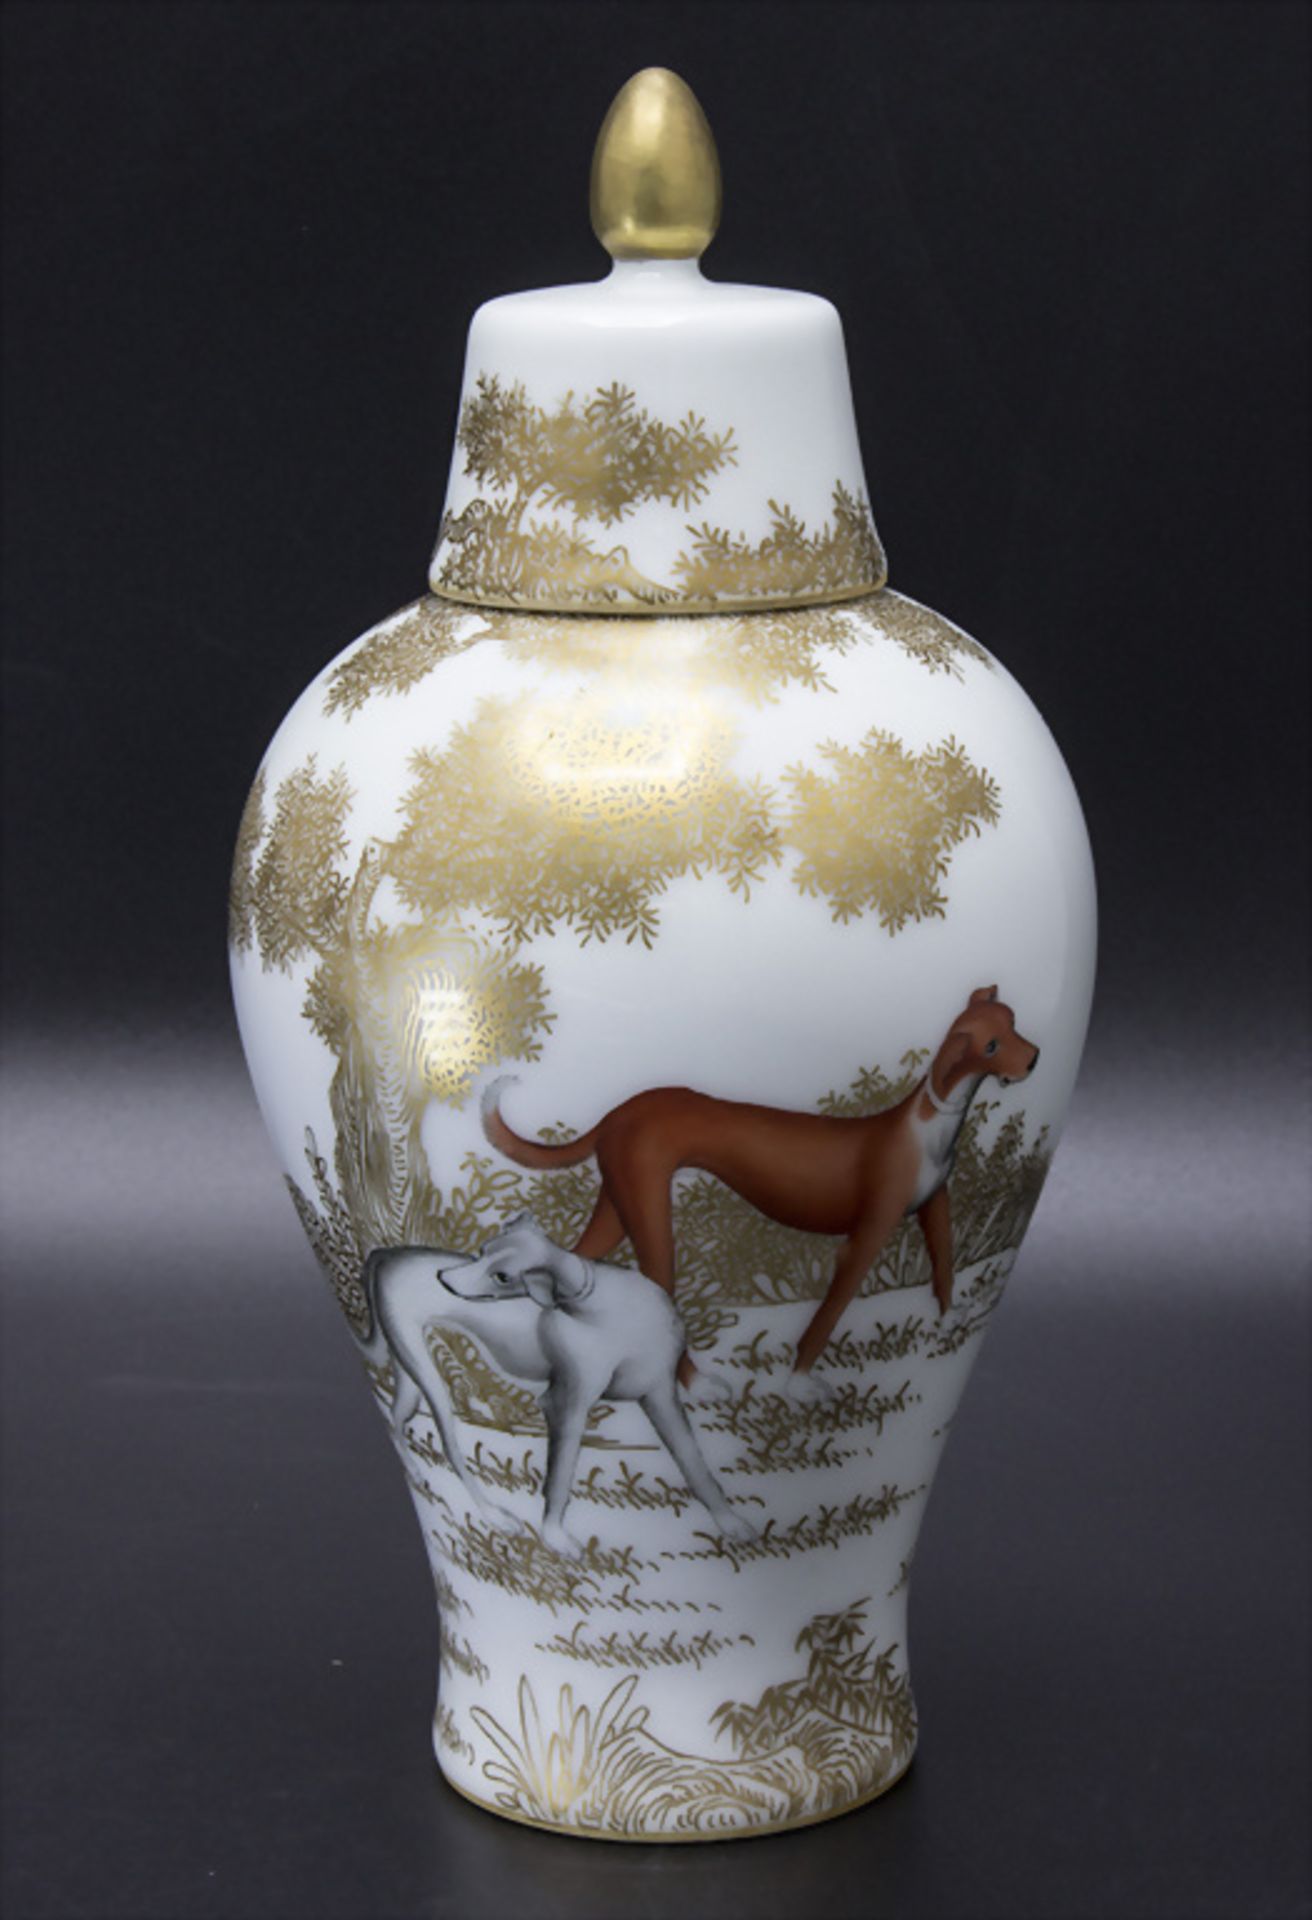 Meiping-Deckelvase / A Meiping covered vase, China, Qing Dynastie (1644-1911), gemarkt ...